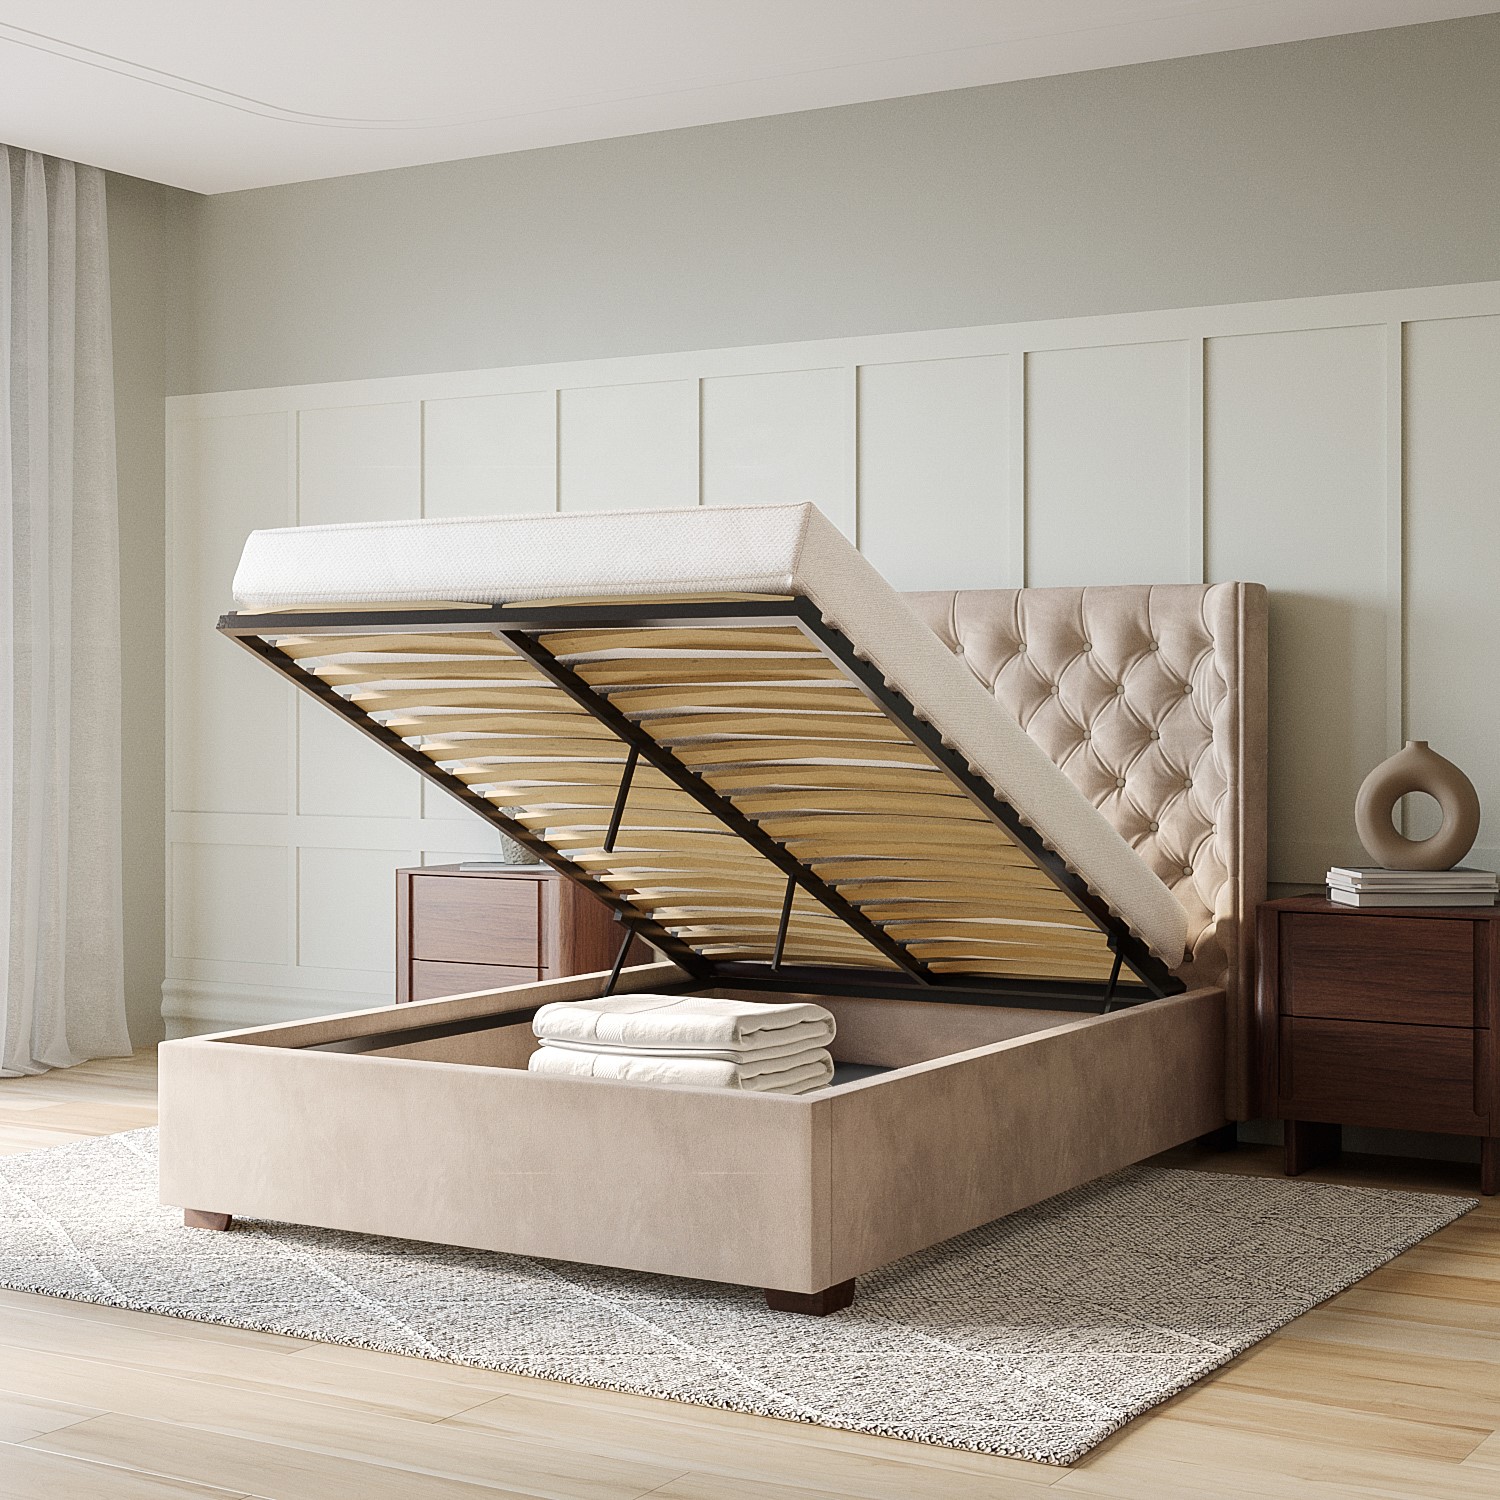 Read more about Beige velvet double ottoman bed with curved headboard milania